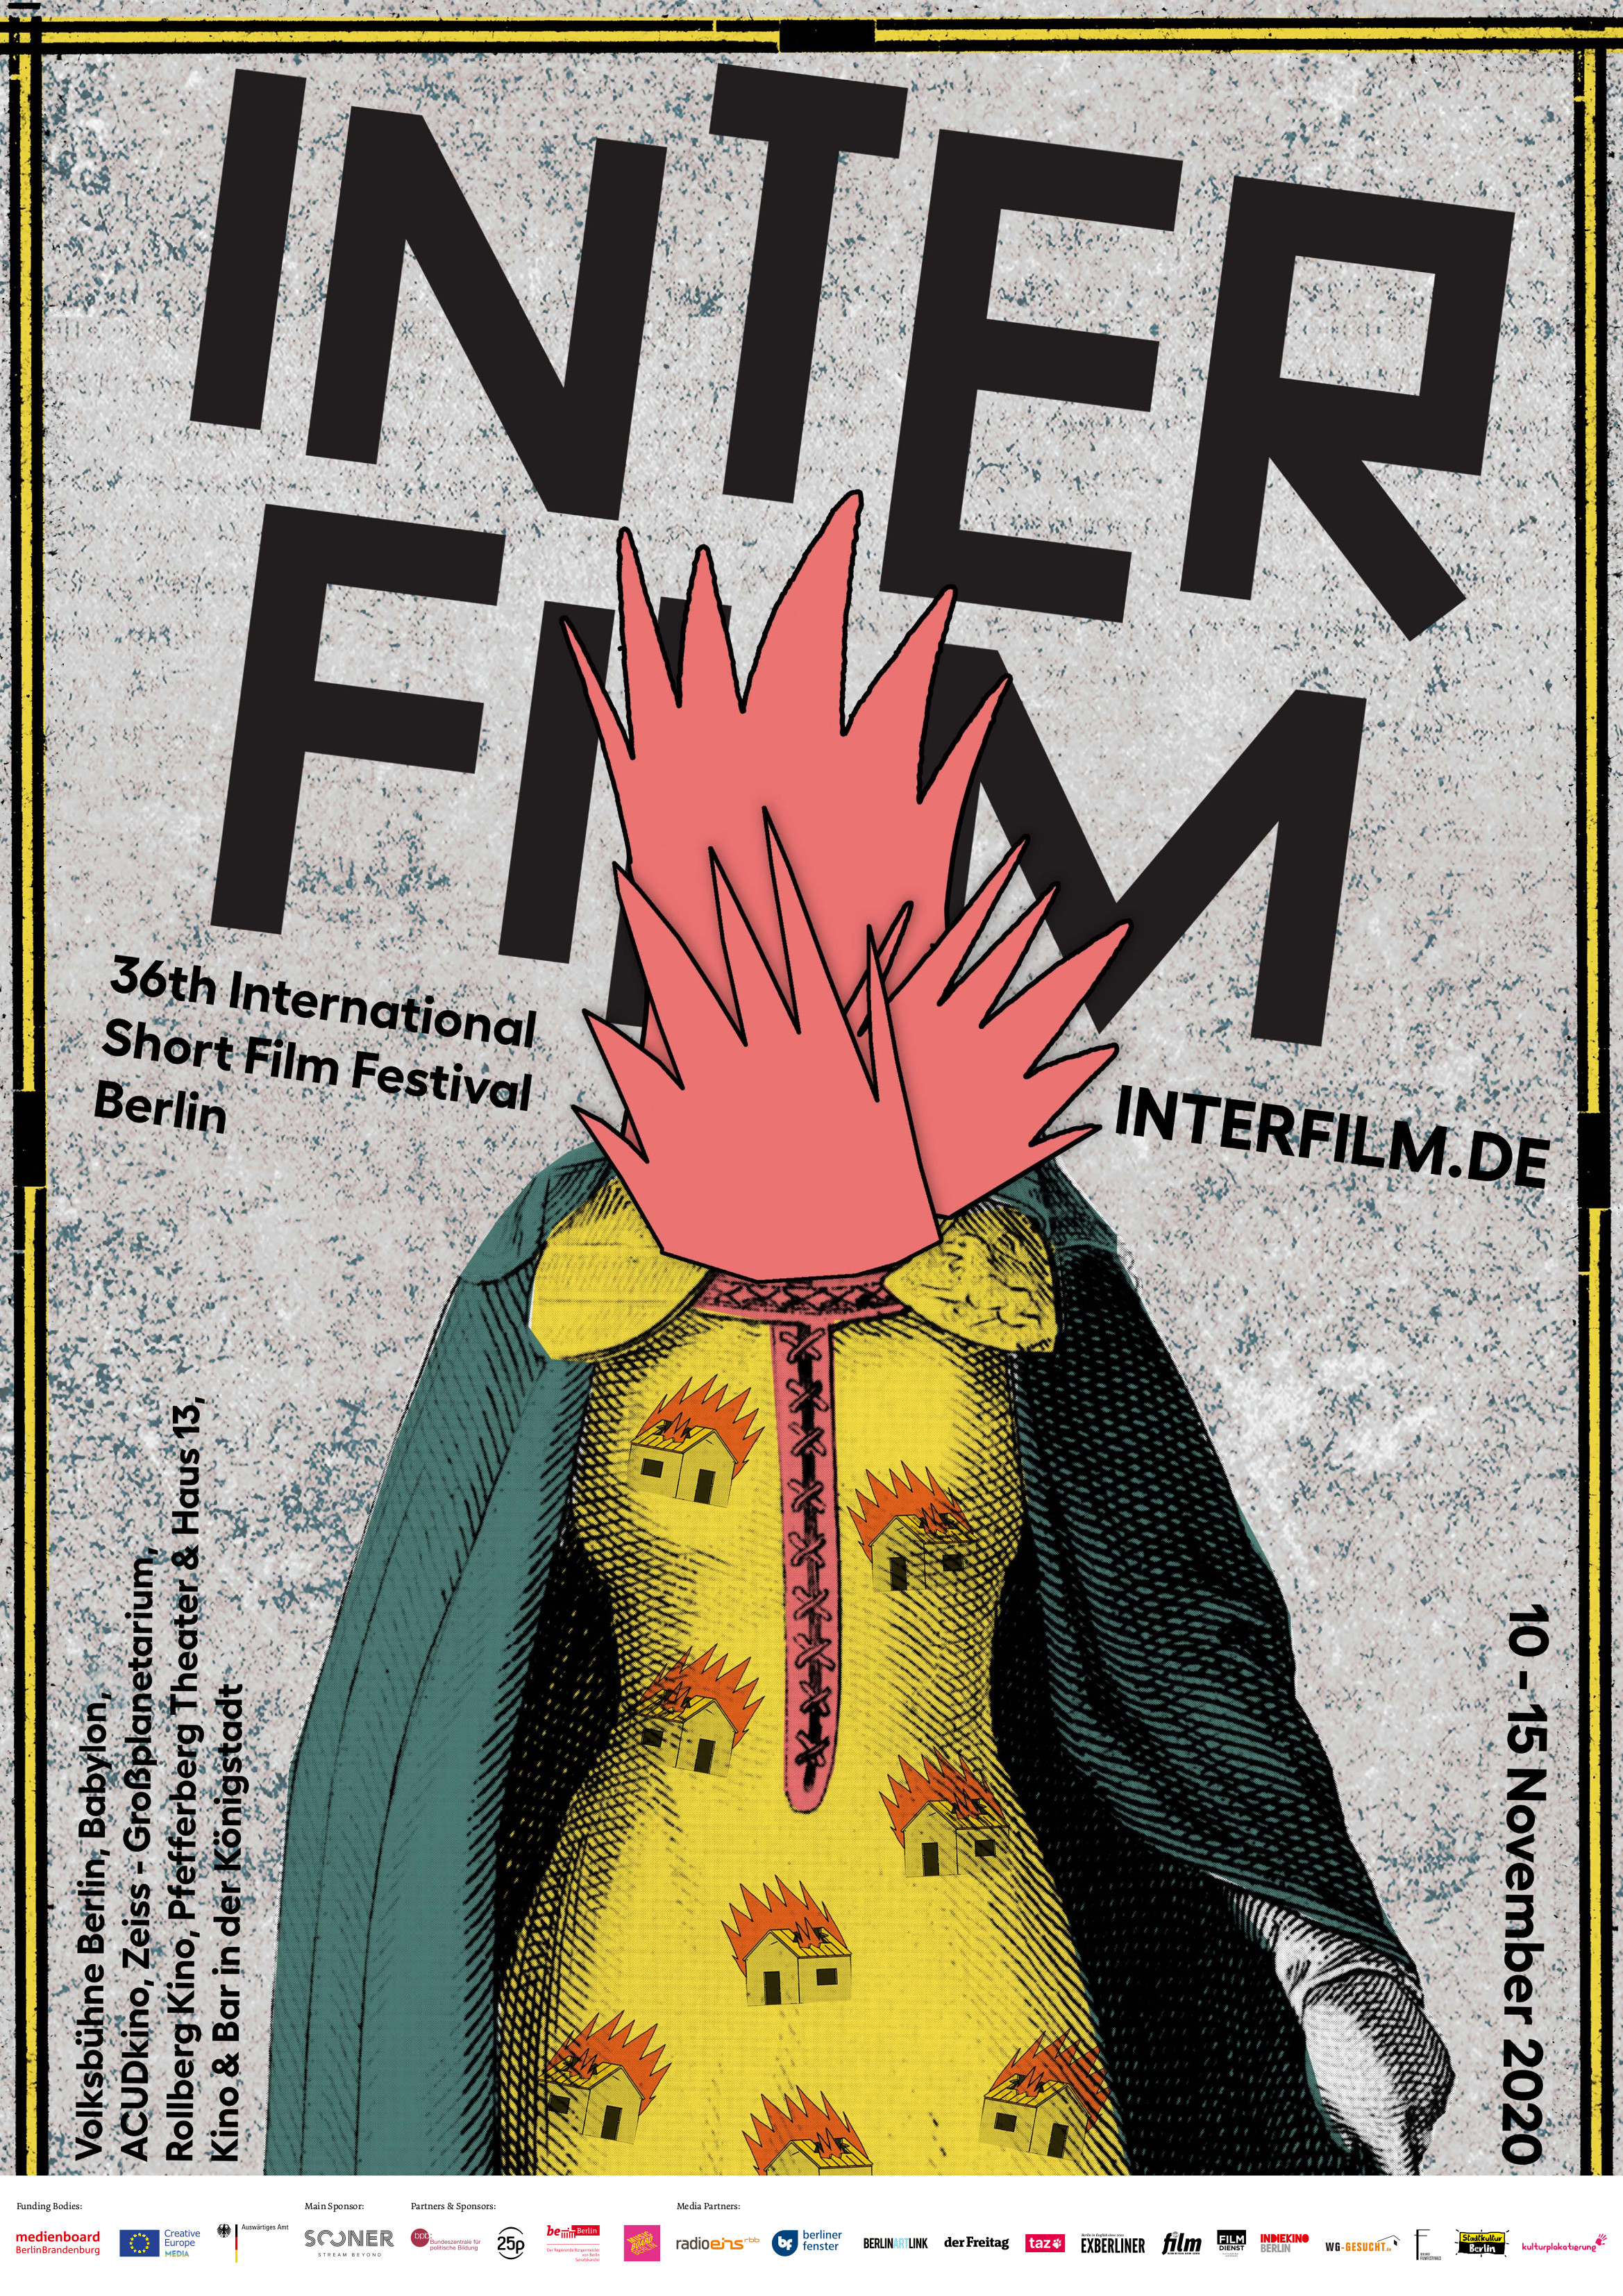 About the Festival | interfilm Berlin